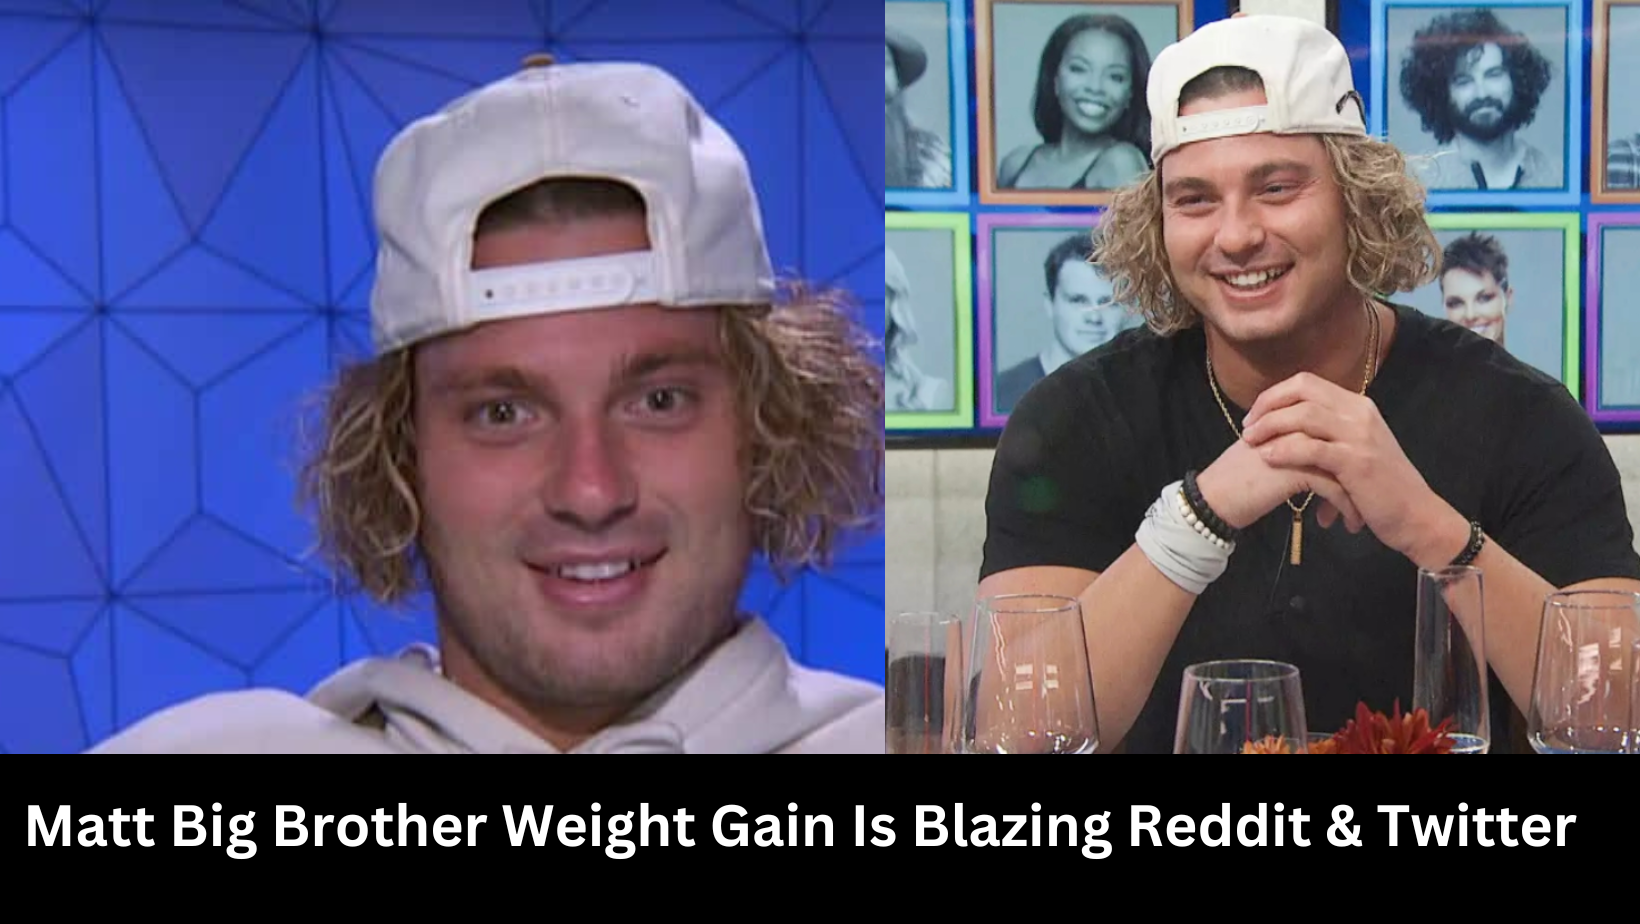 Matt Big Brother Weight Gain Is Blazing Reddit & Twitter – Here’s What You Need to Know